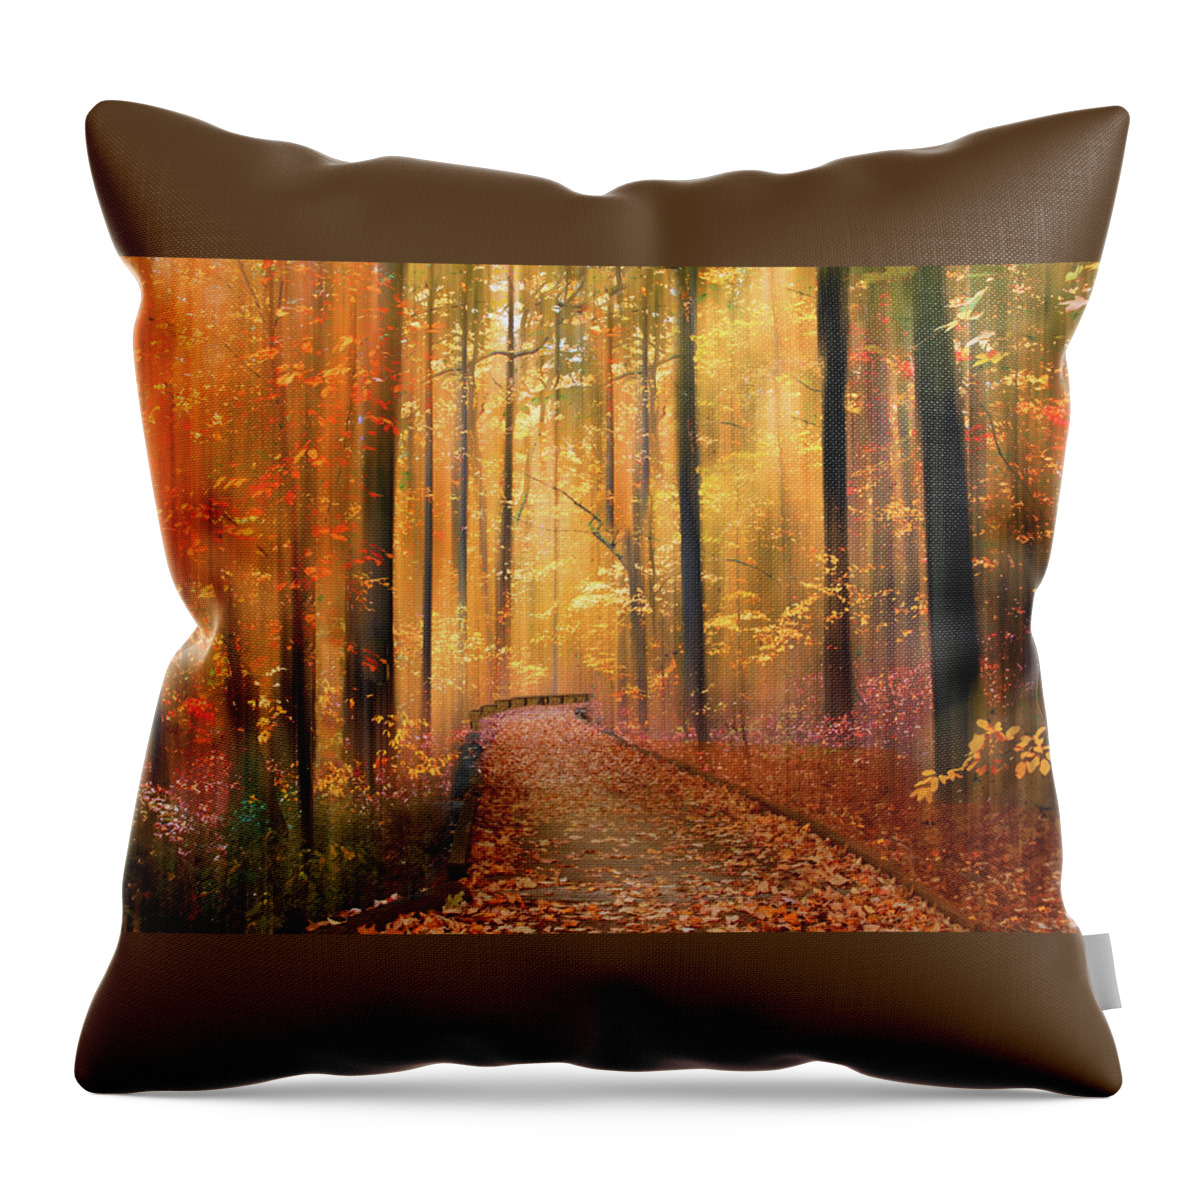 Forest Throw Pillow featuring the photograph The Flickering Forest by Jessica Jenney